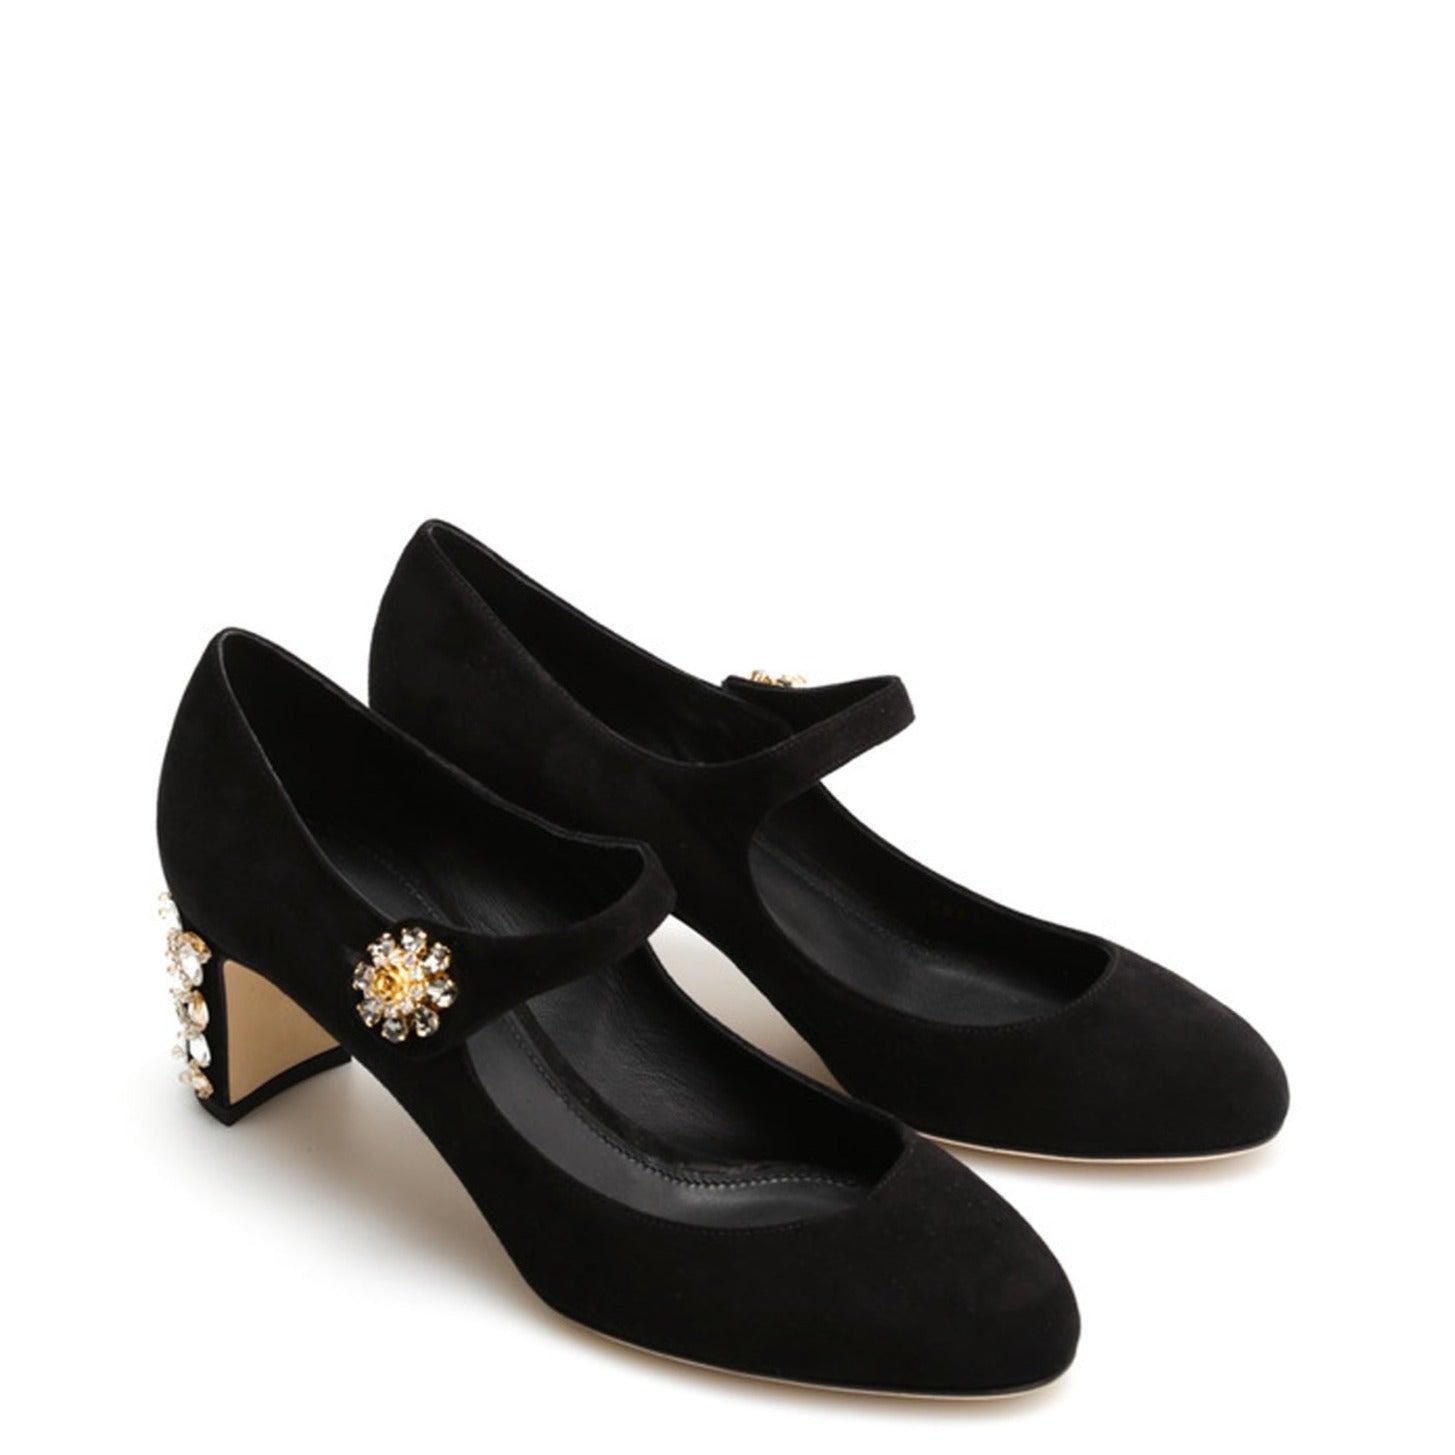 Dolce & Gabbana Mary Jane Suede Pumps in Black | Lyst